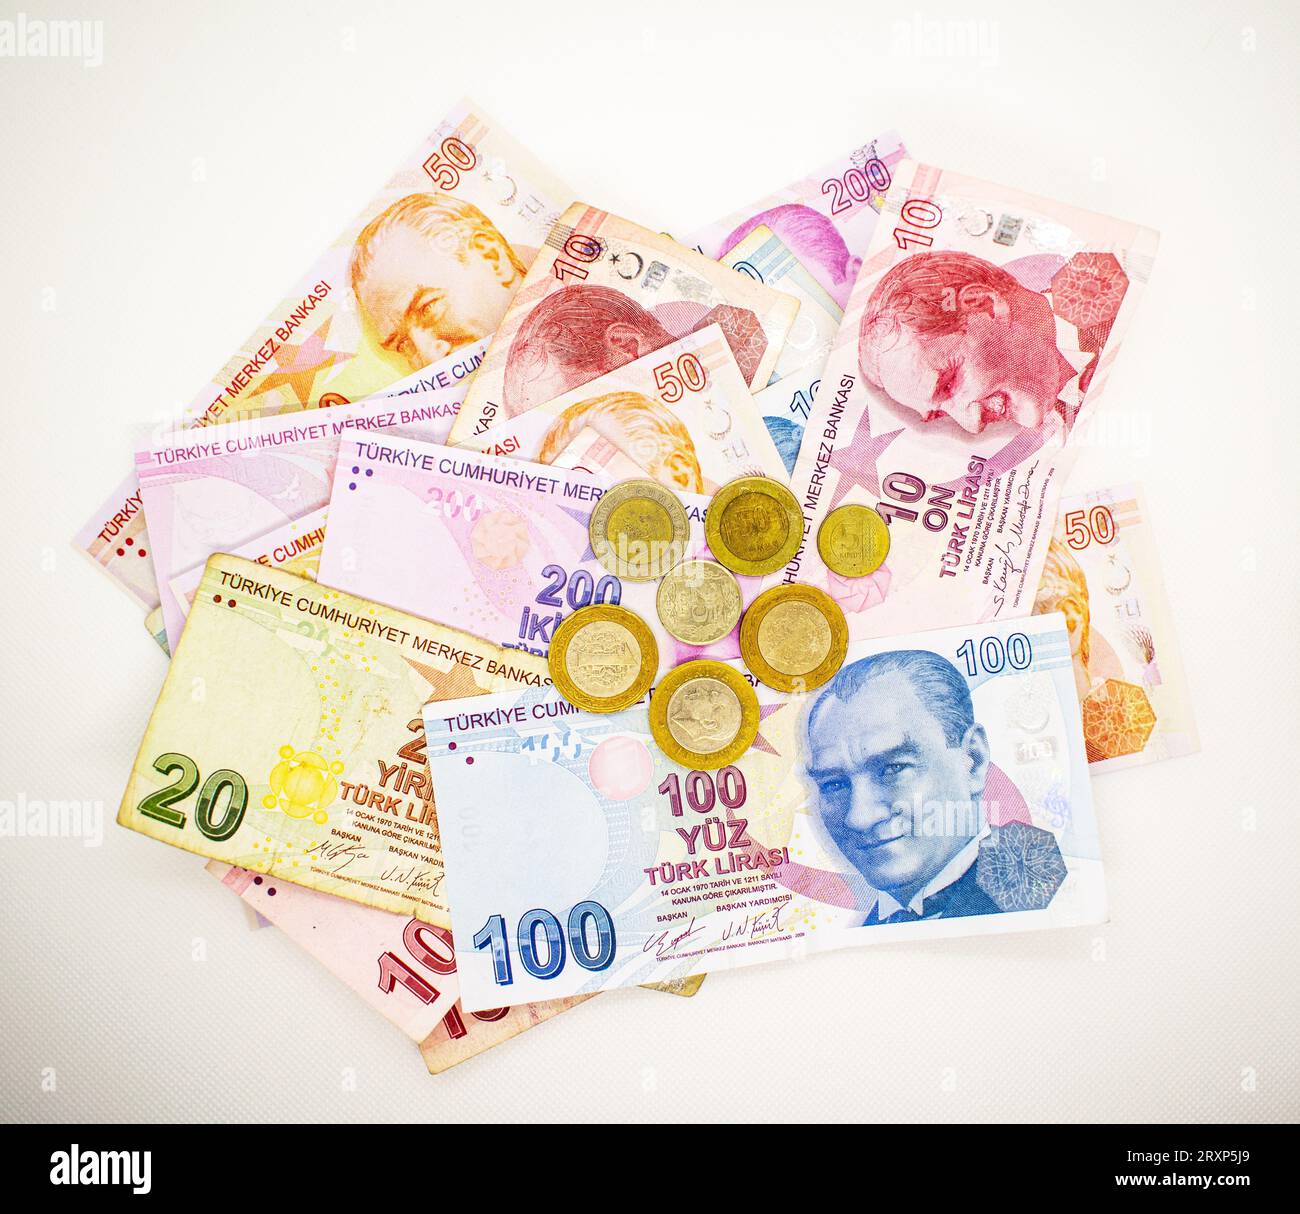 Turkish Lira - Turkish Banknotes - local currency coins and banknotes, featuring image of Ataturk, in Republic of Turkey Stock Photo